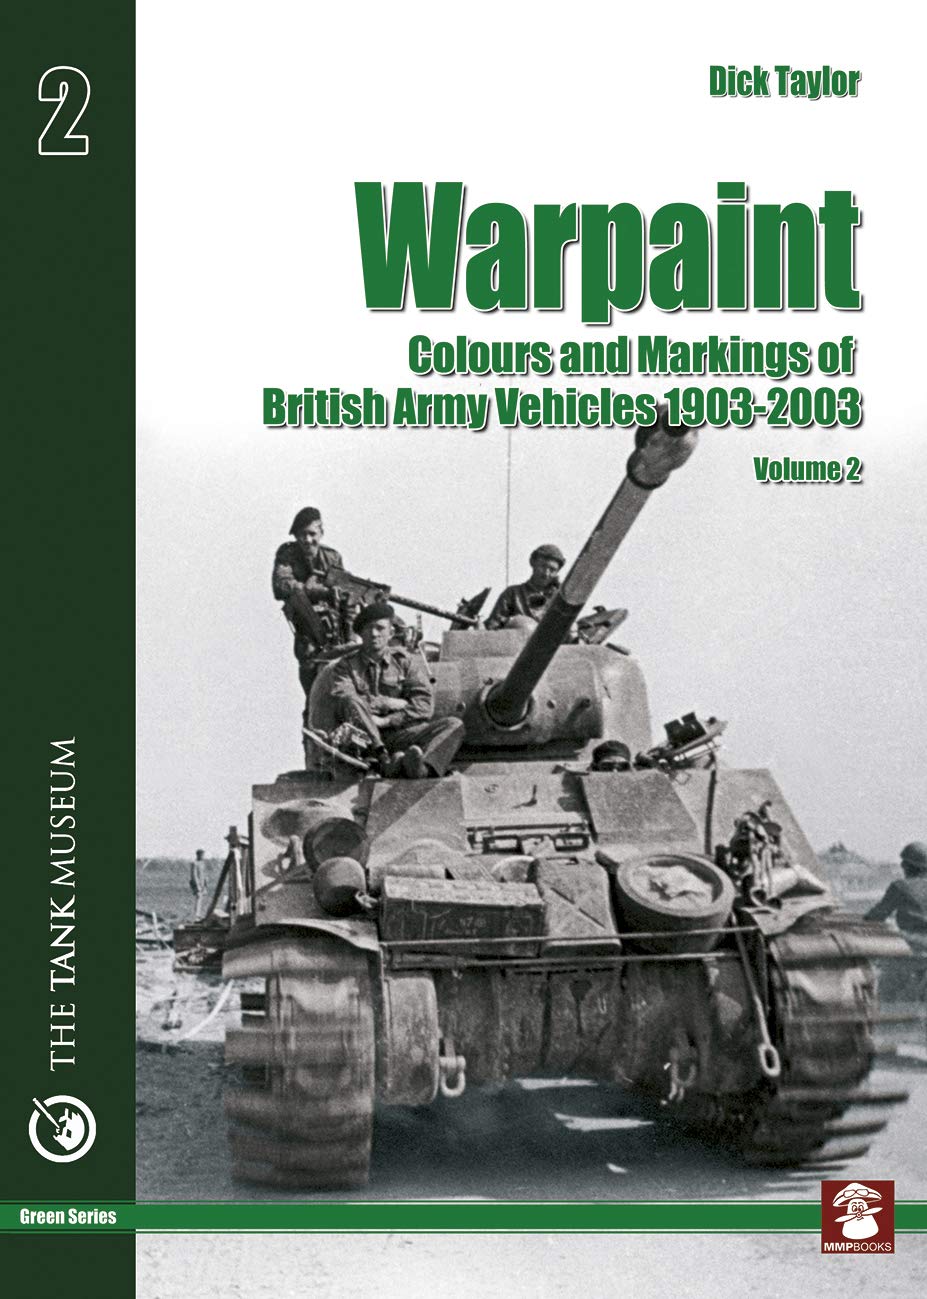 Warpaint - Colours and Markings of British Army Vehicles 1903-2003 - Volume 2